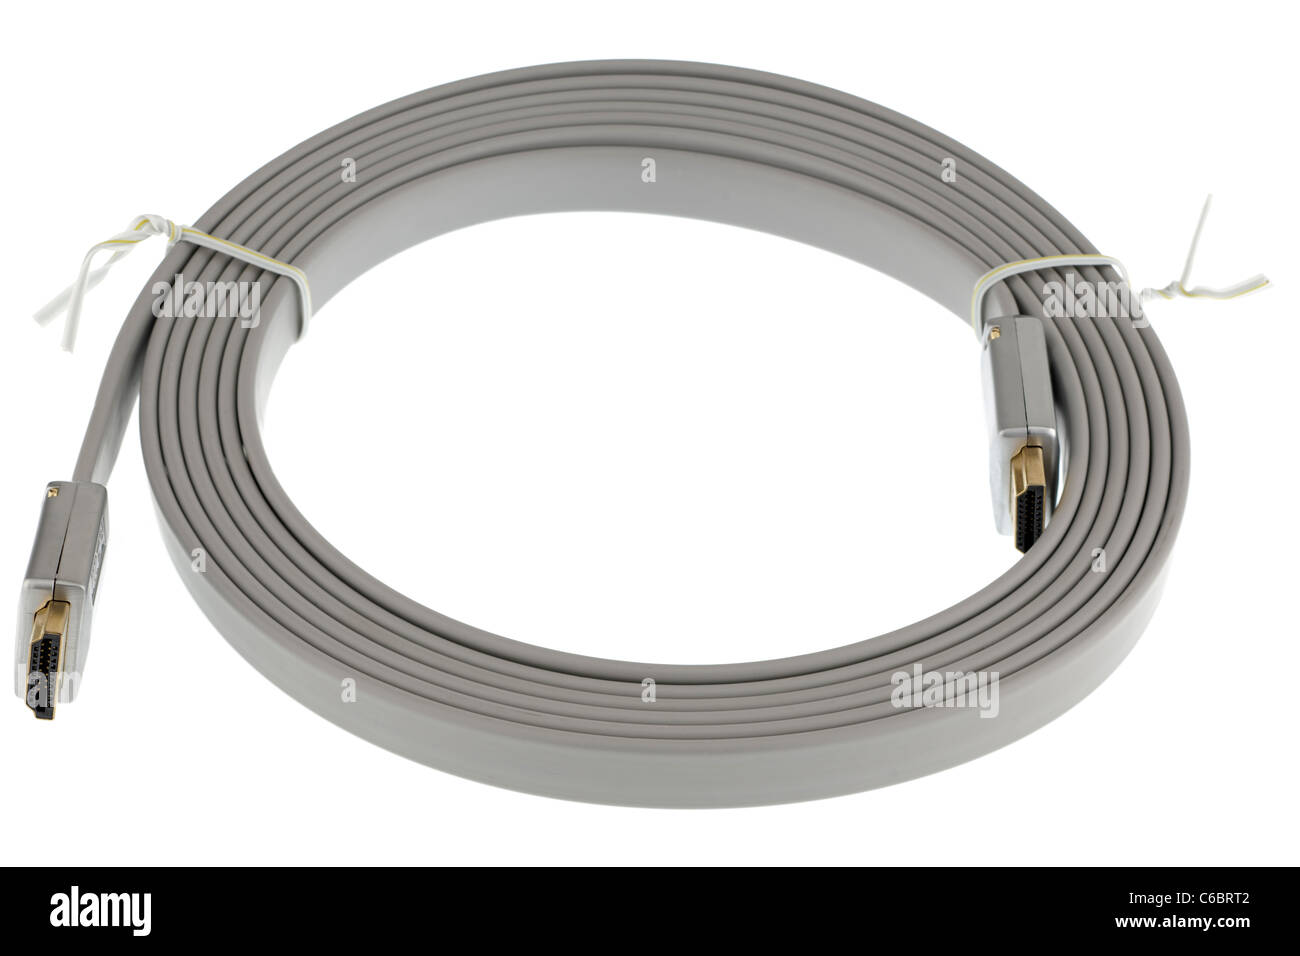 Two metre grey coiled flat hdmi to hdmi digital cable Stock Photo